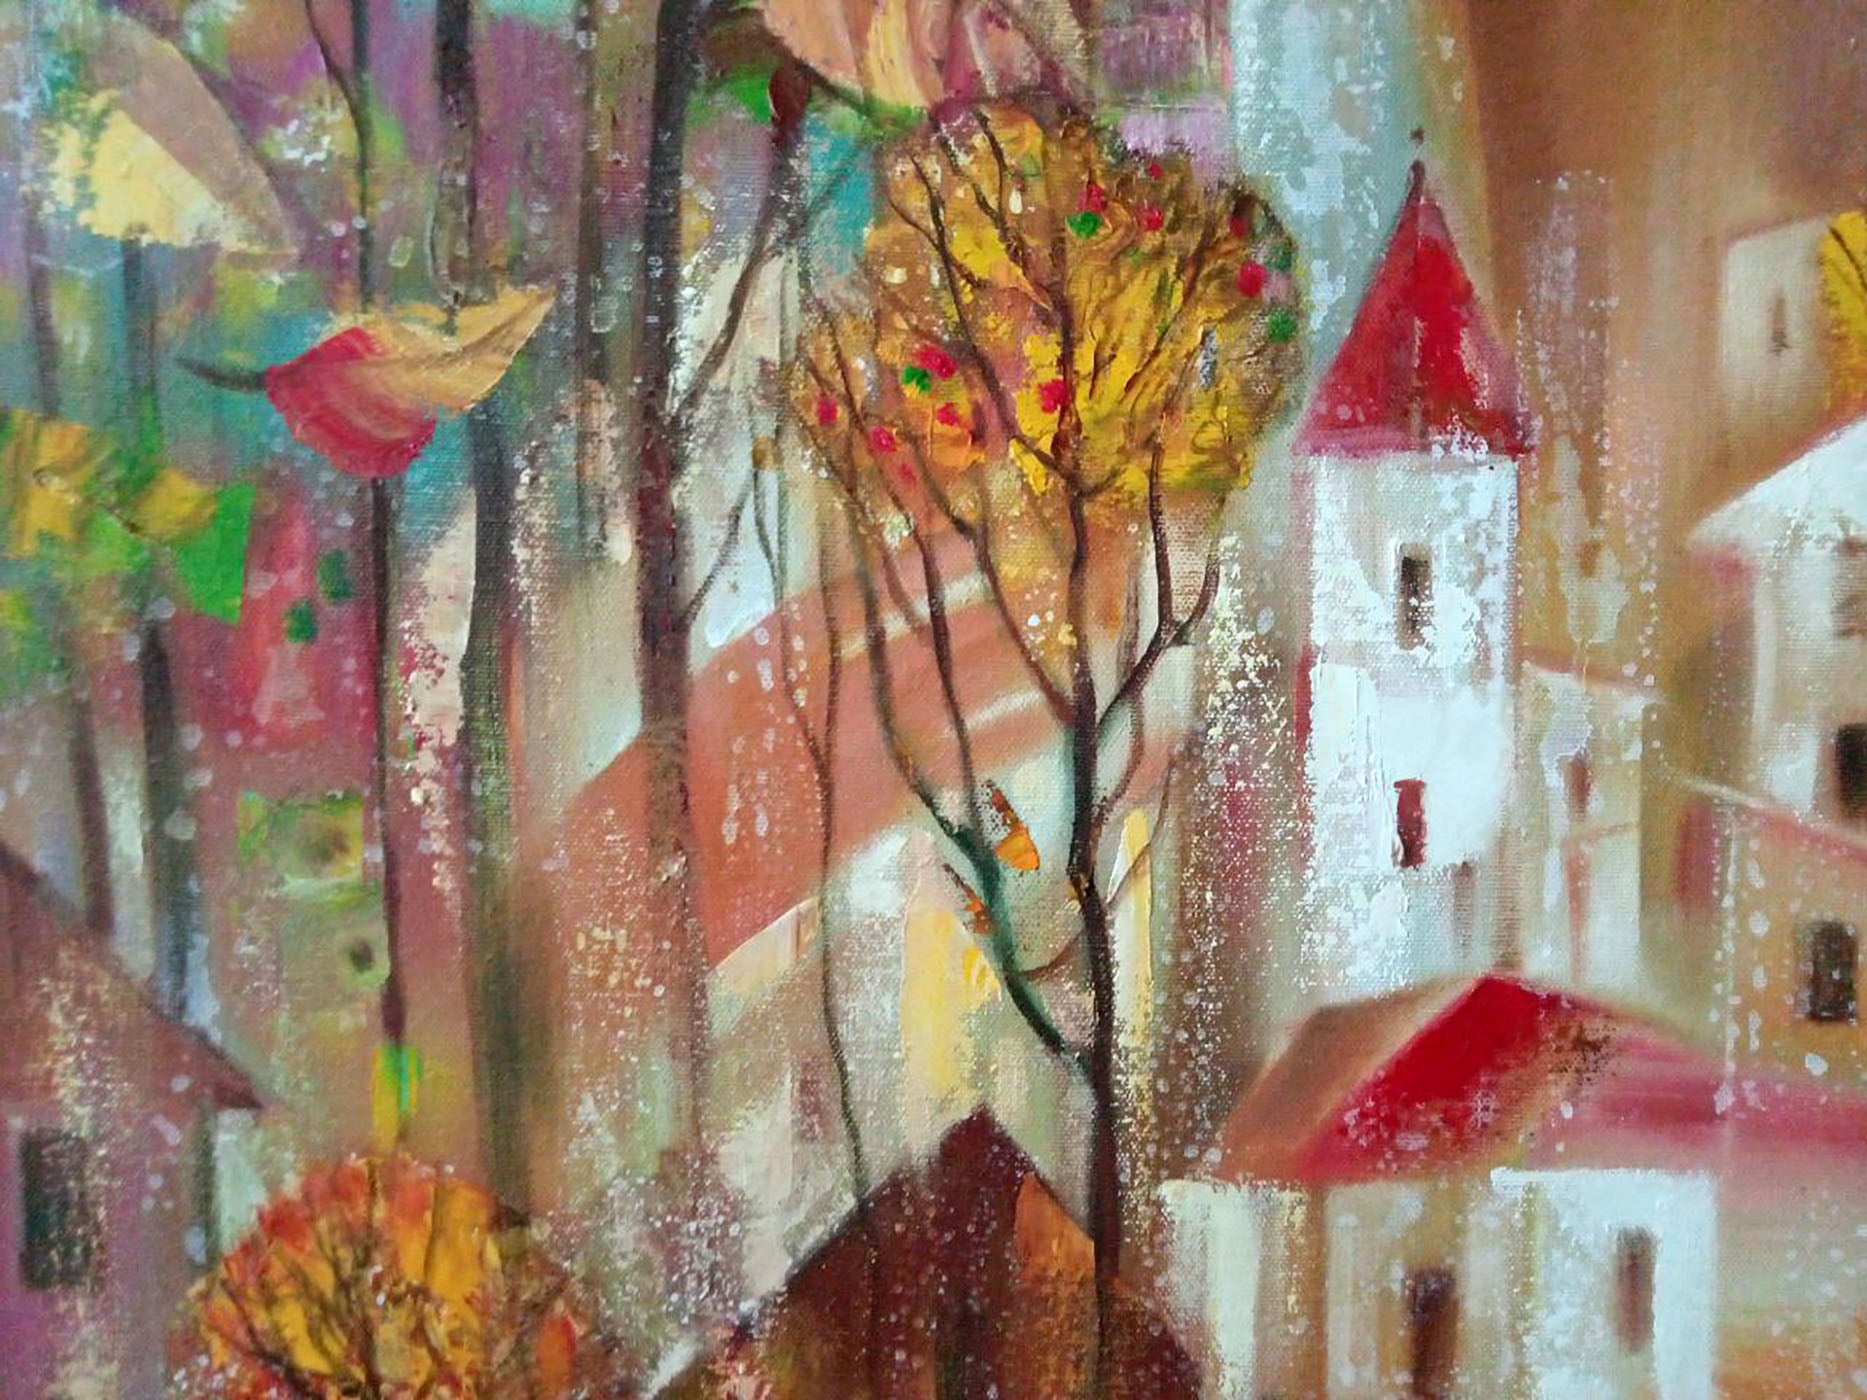 Abstract oil painting "Autumn in the City" by Borisovich Tarabanov with vibrant fall colors.